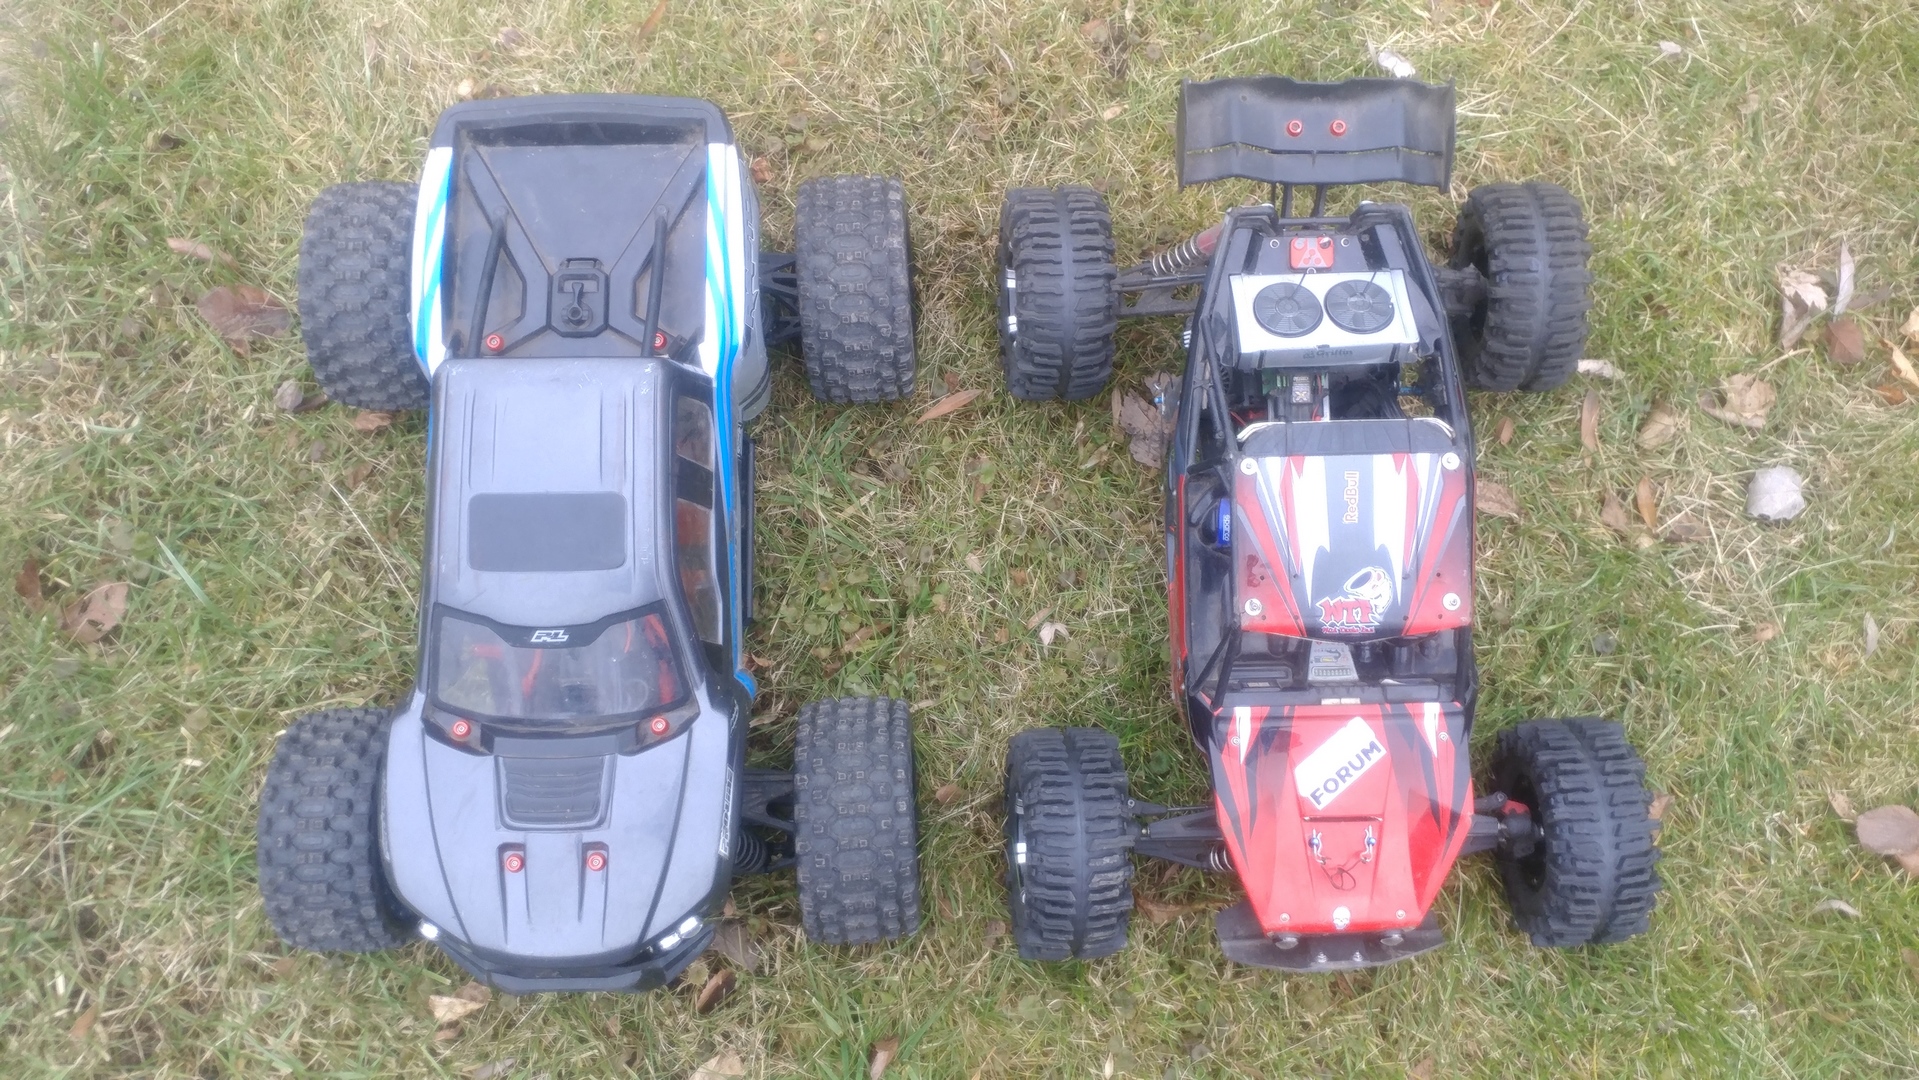 How Large Is The Arrma Zennon? #1